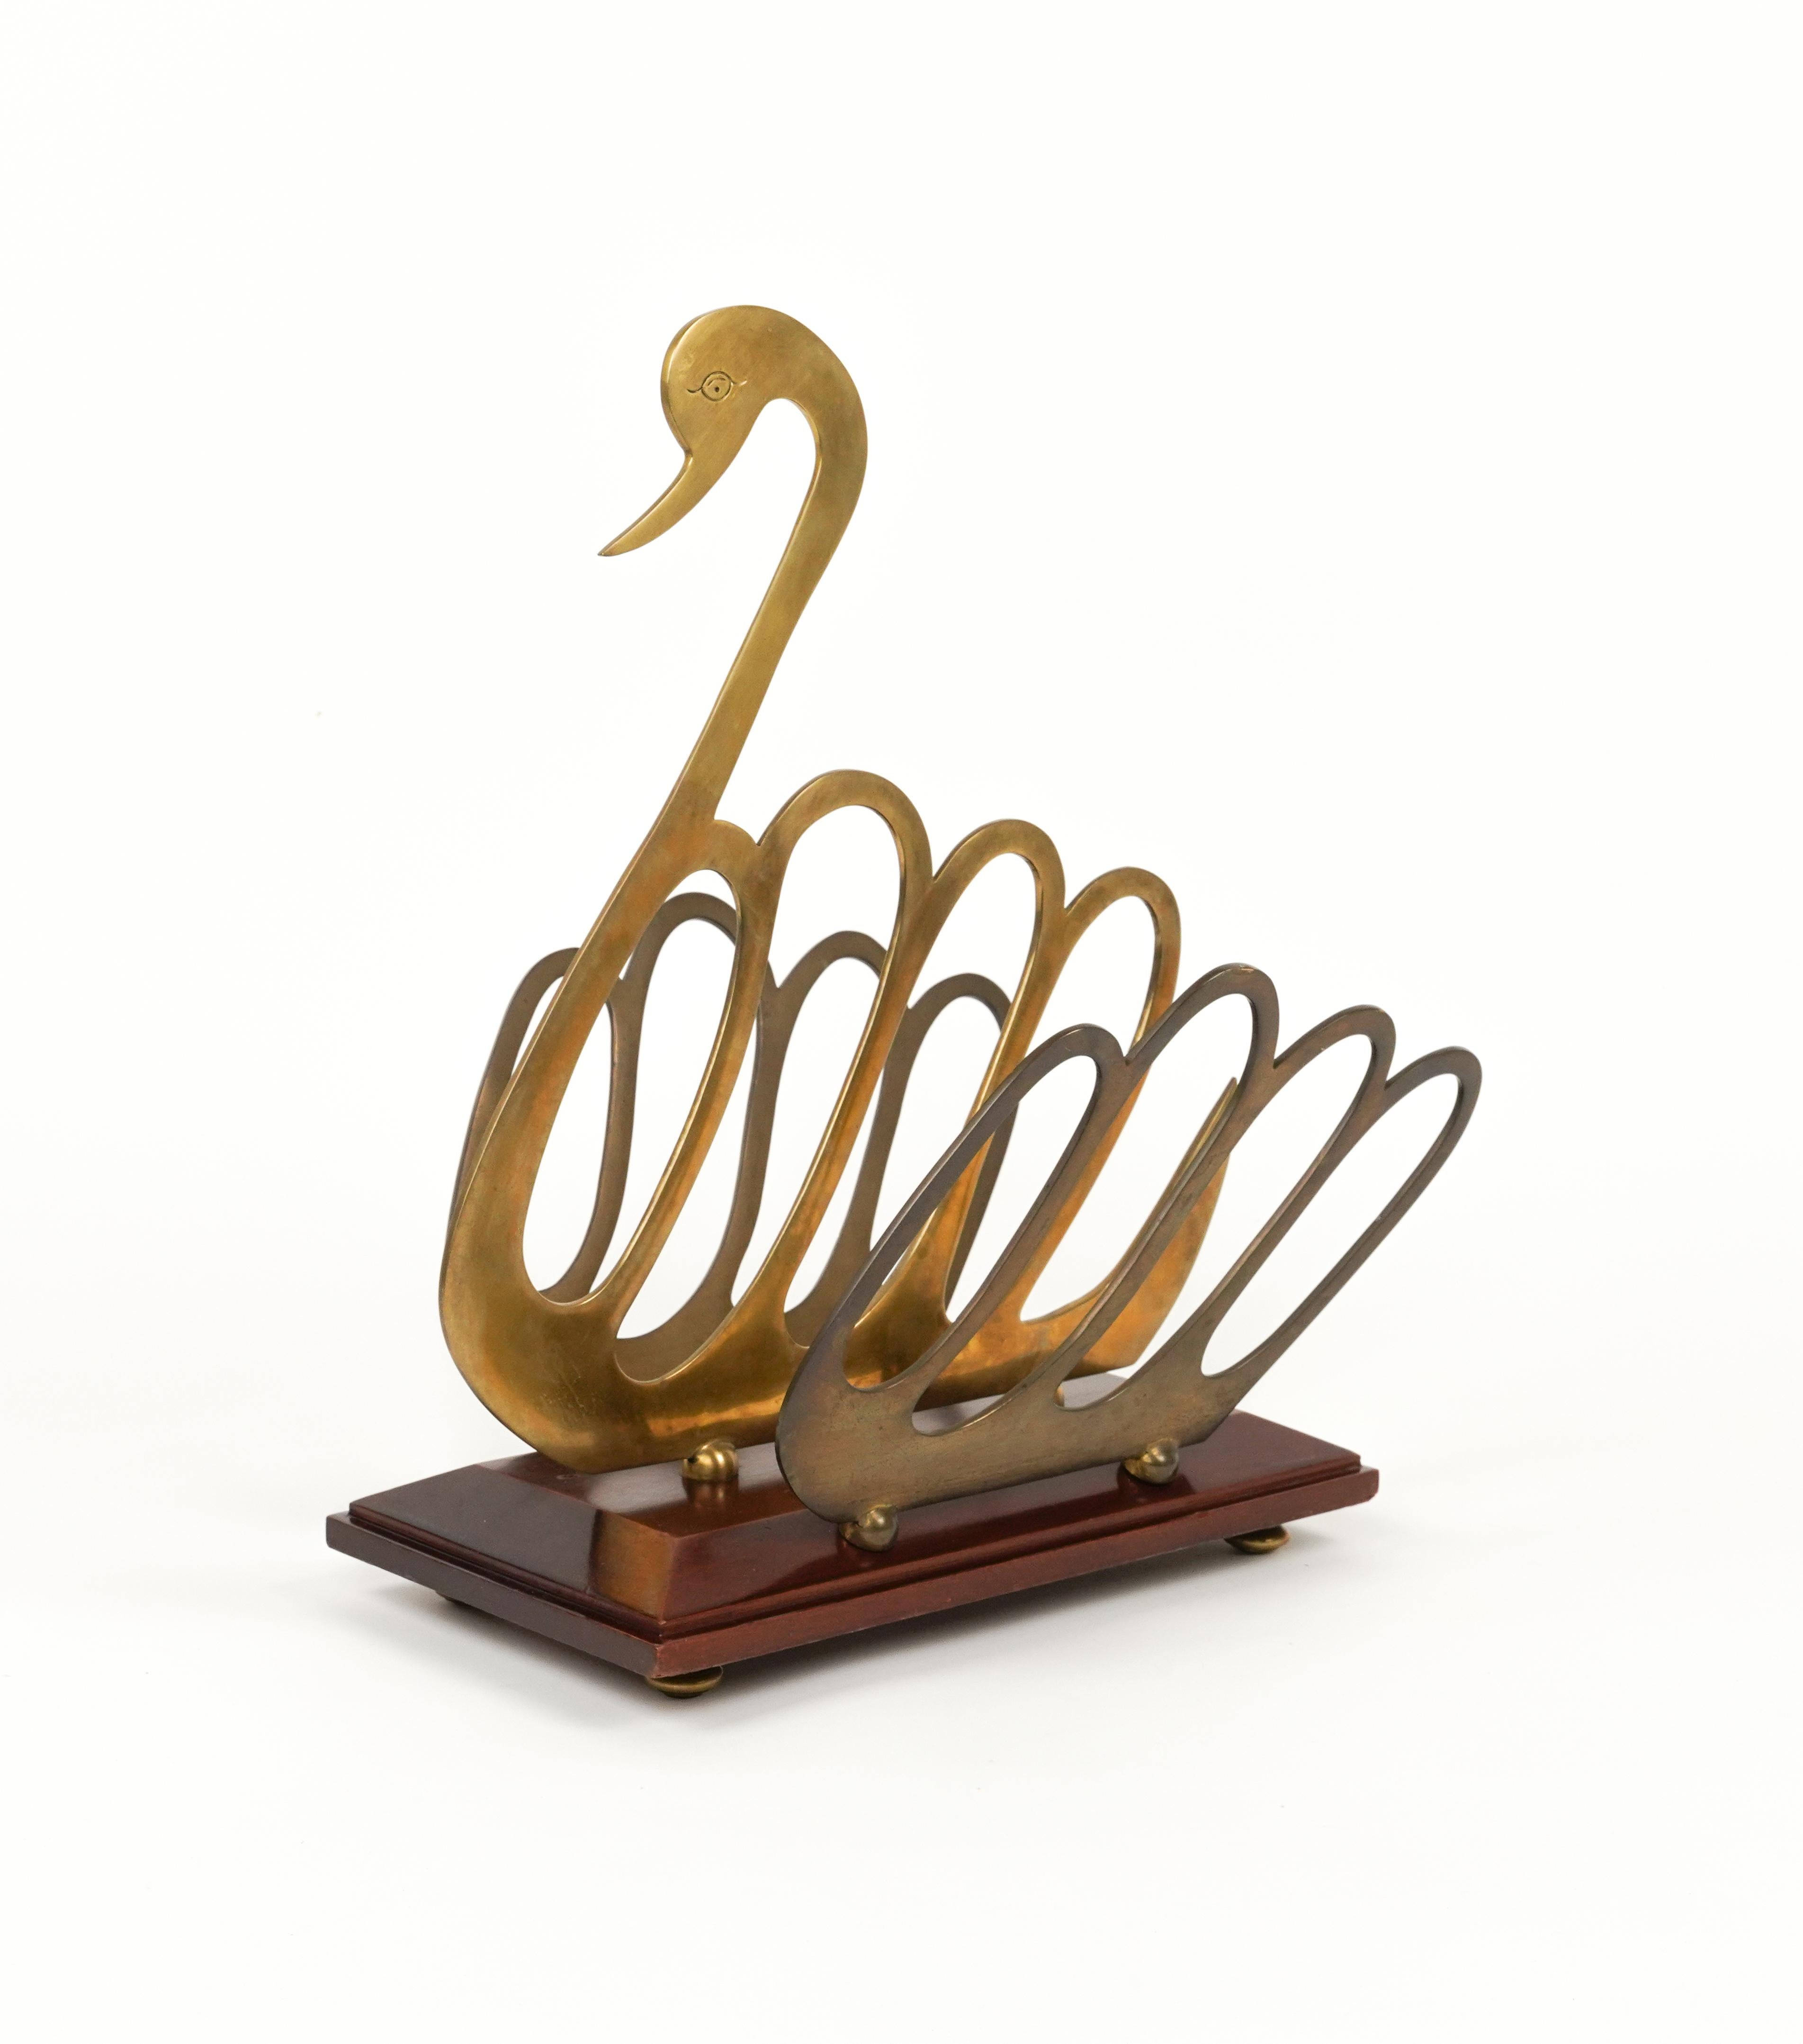 Swan Shaped Magazine Rack in Wood and Brass Maison Jansen Style, Italy 1970s For Sale 2